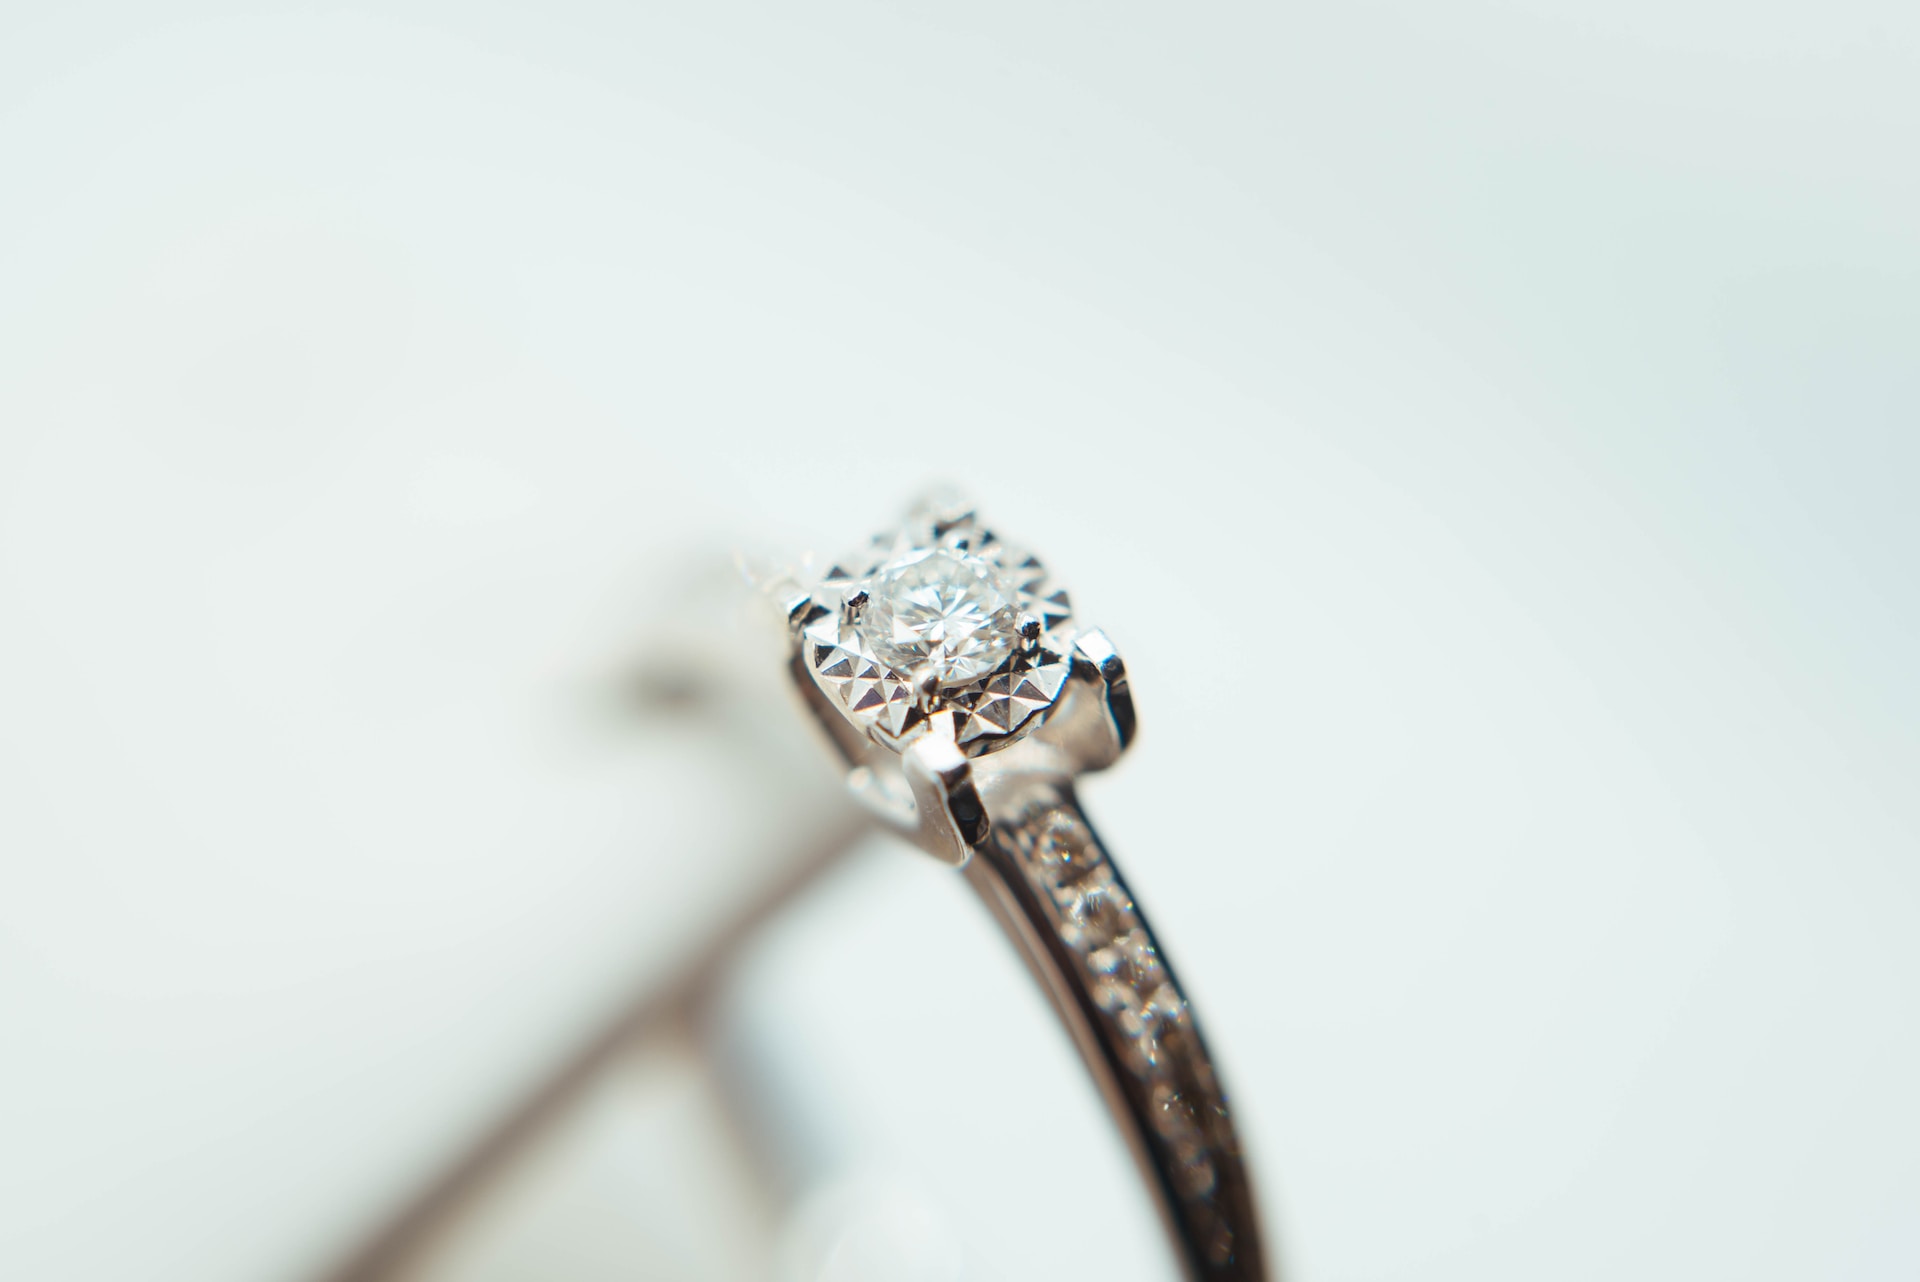 close-up of a diamond ring setting